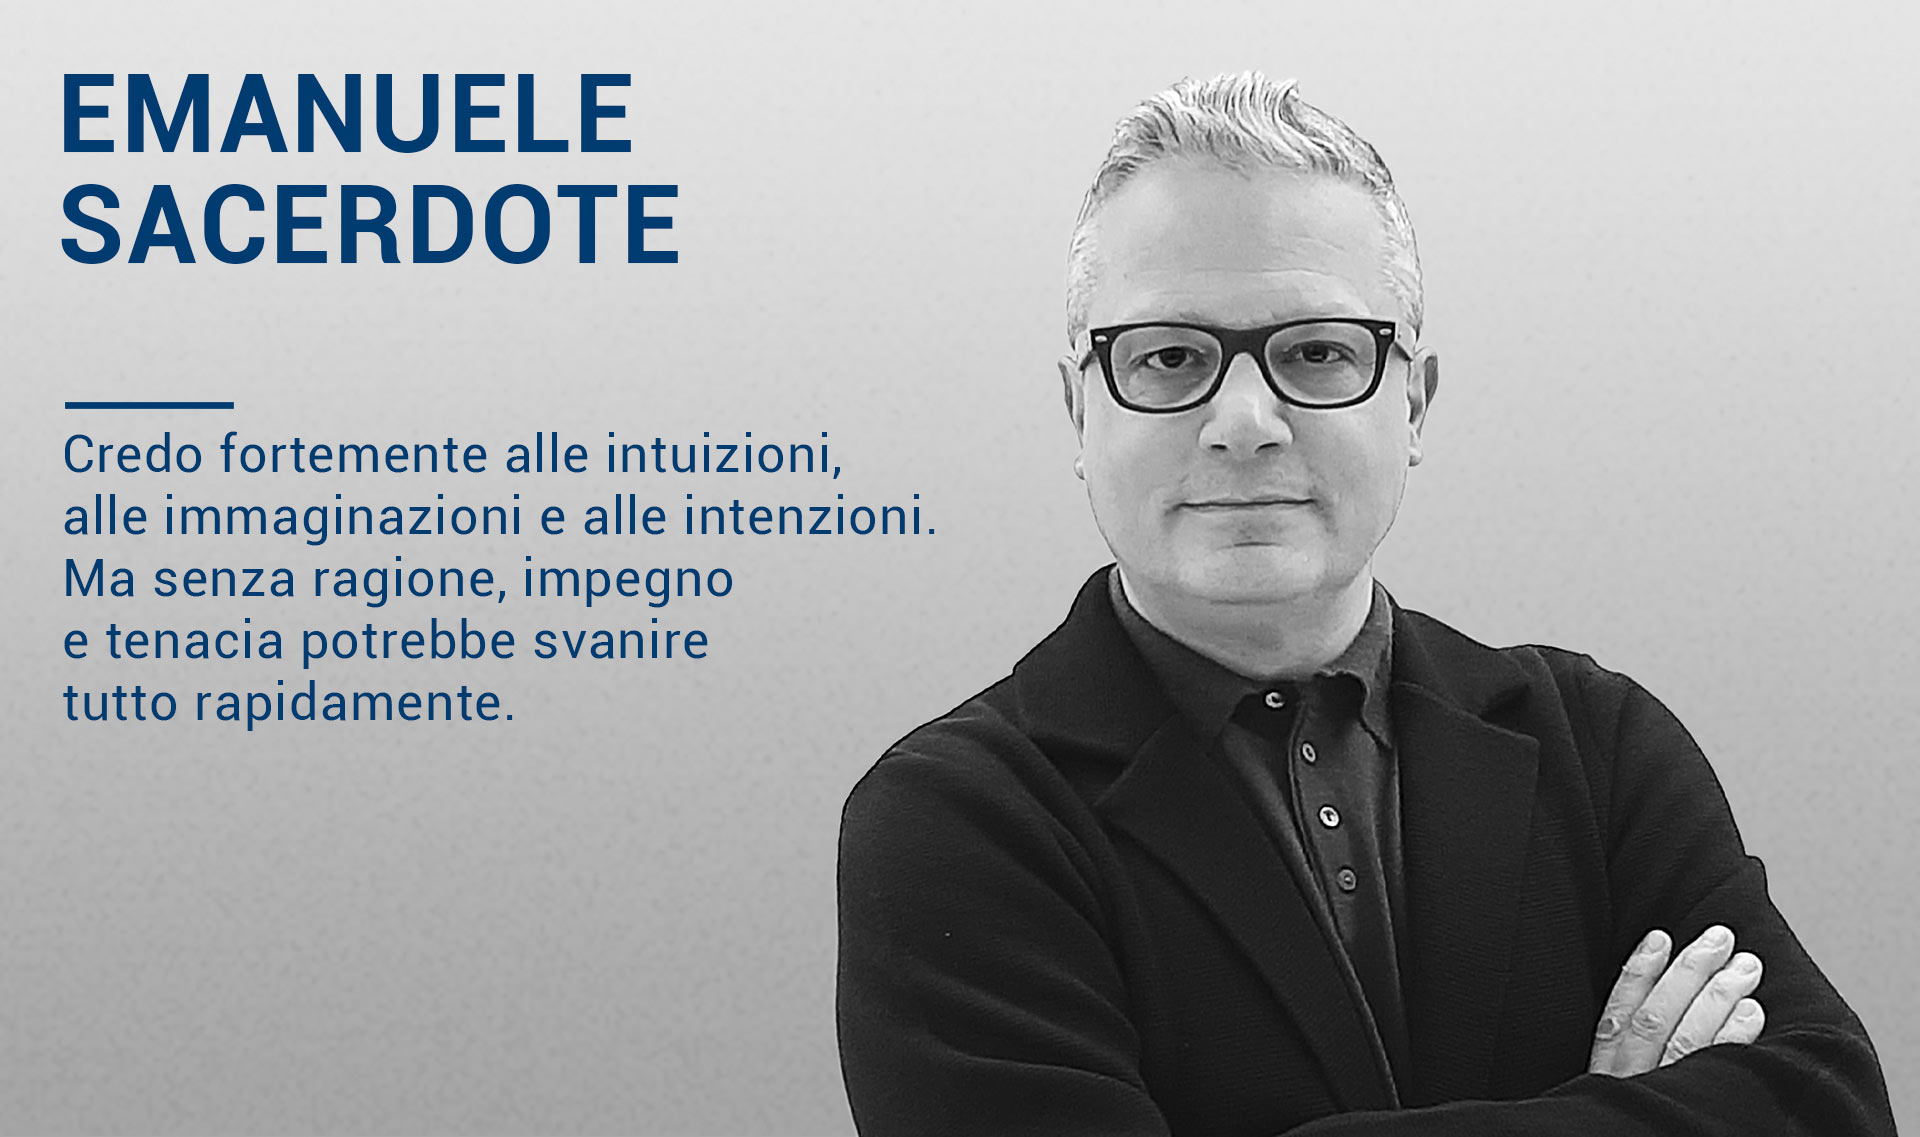 emanuele sacerdote about